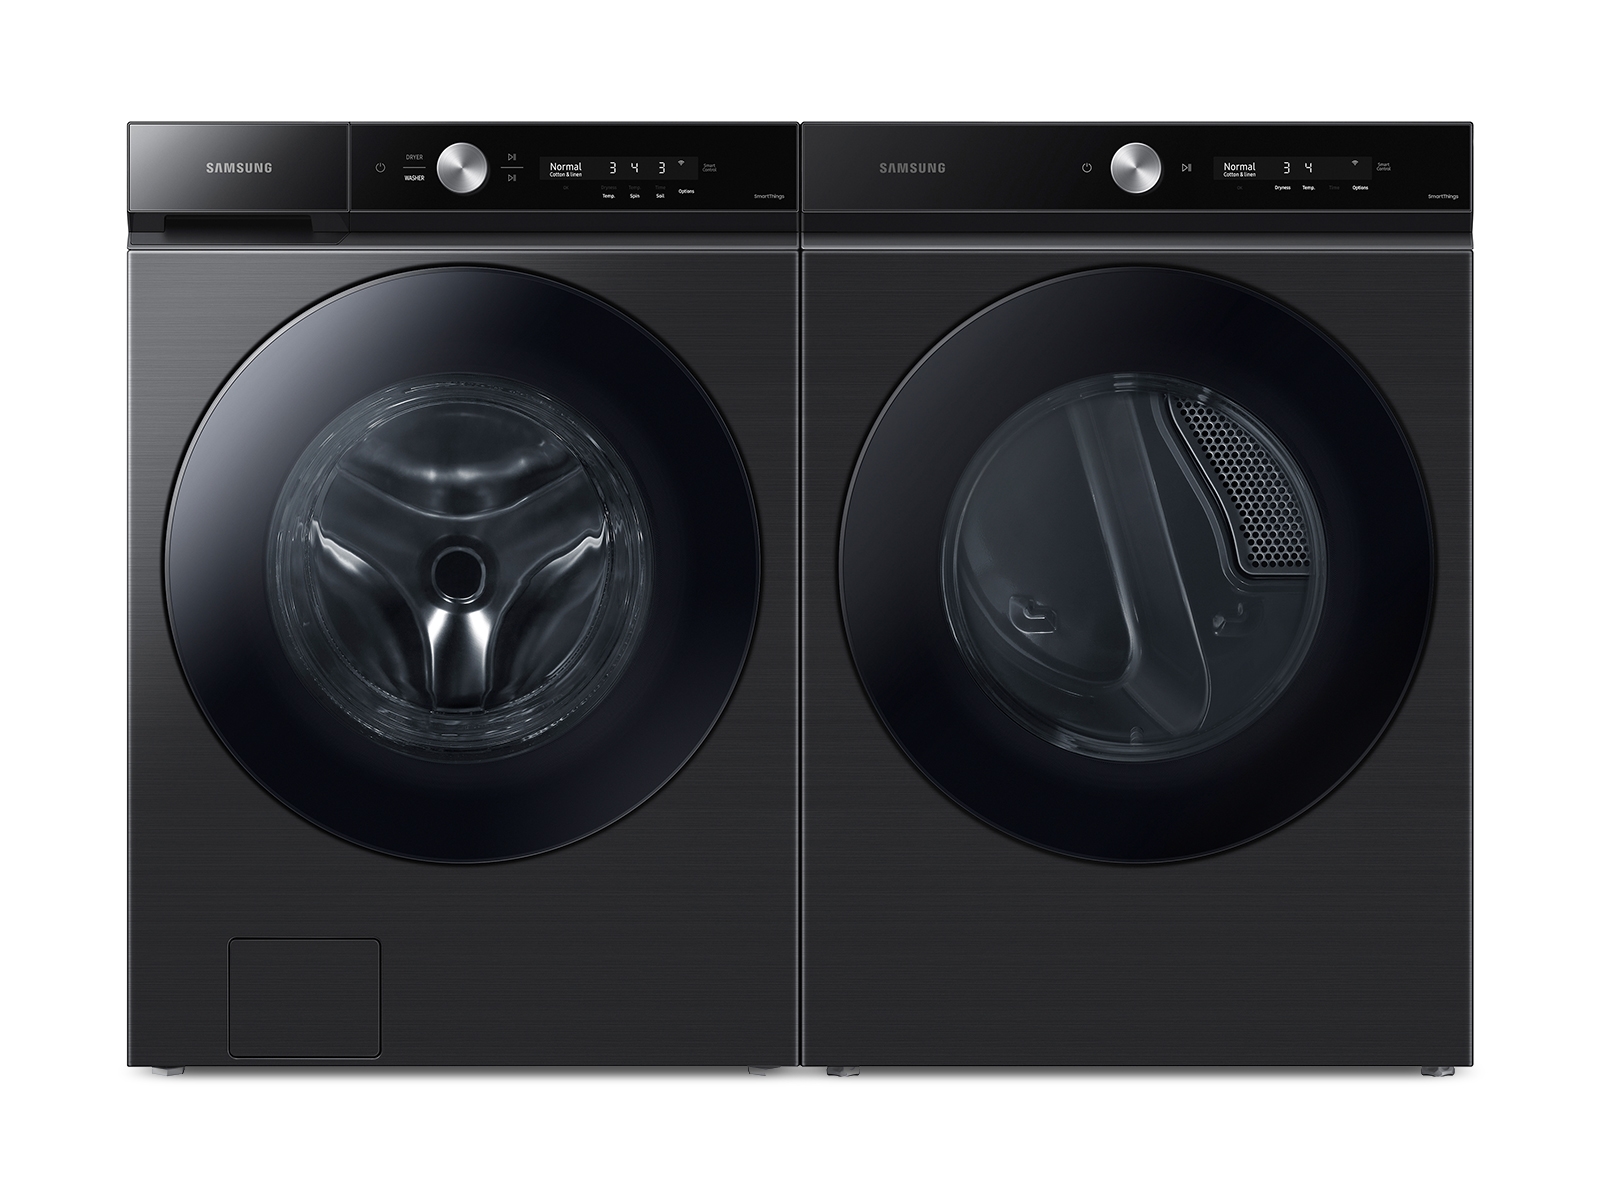 Photos - Tumble Dryer Samsung Bespoke Ultra Capacity Front Load Washer and Gas Dryer in Brushed 